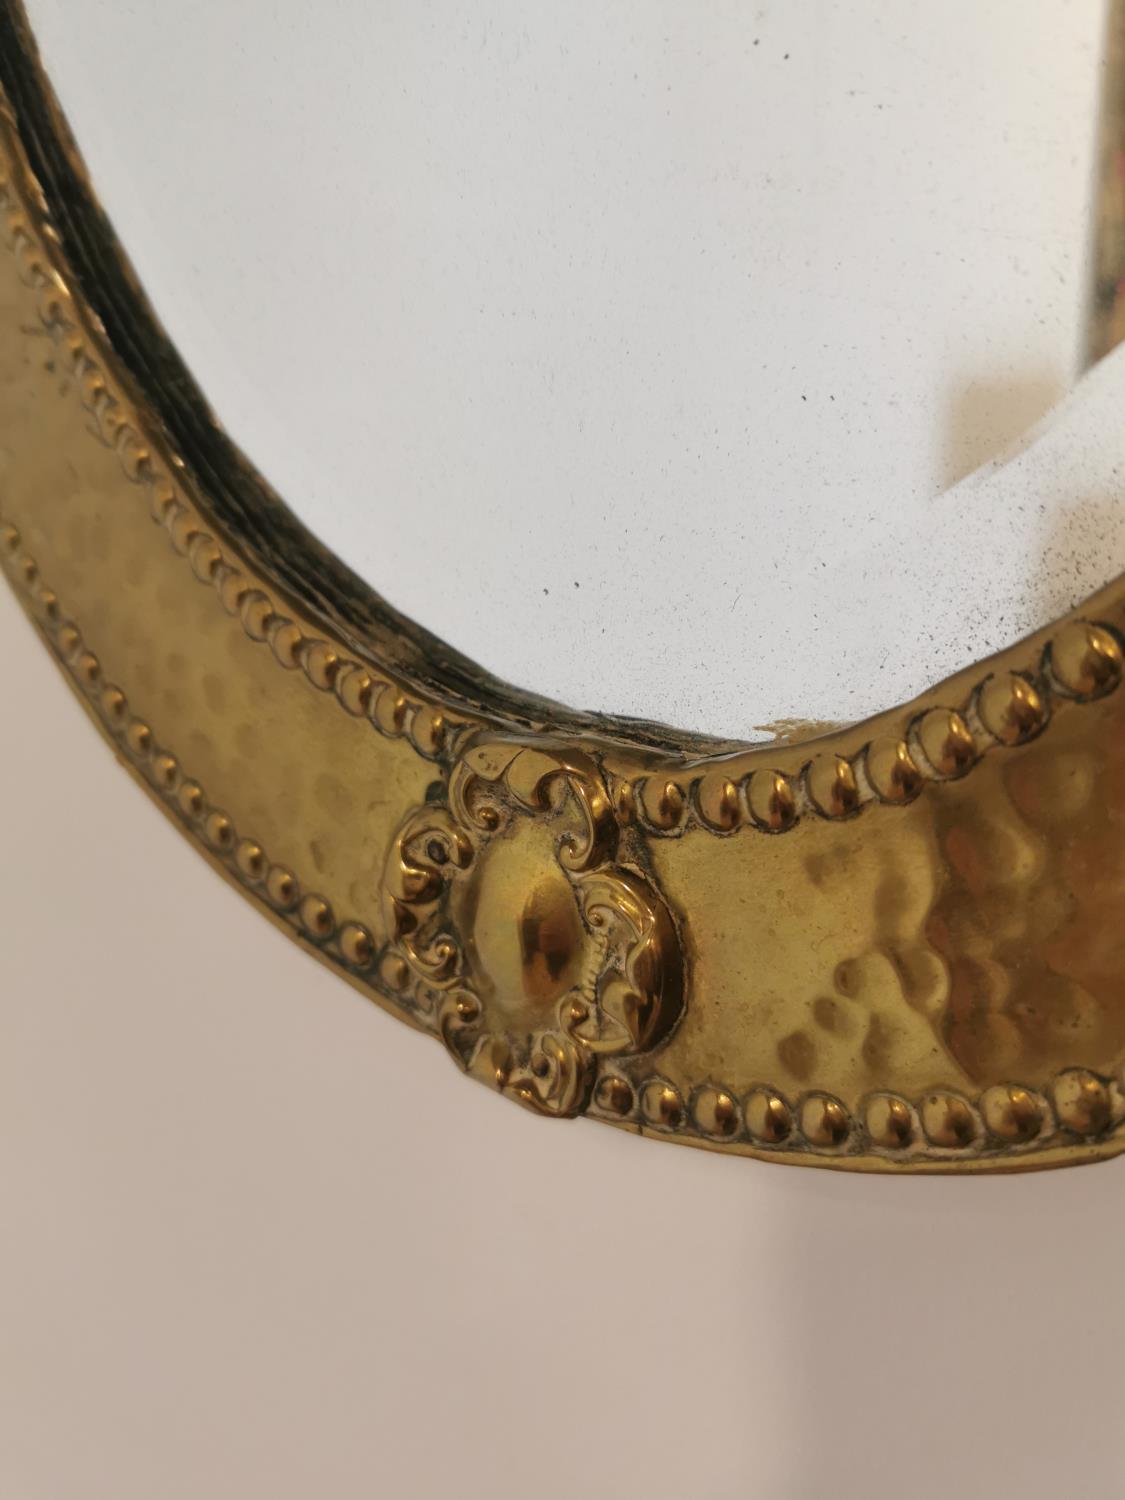 Early 20th C. oval wall mirror - Image 2 of 4